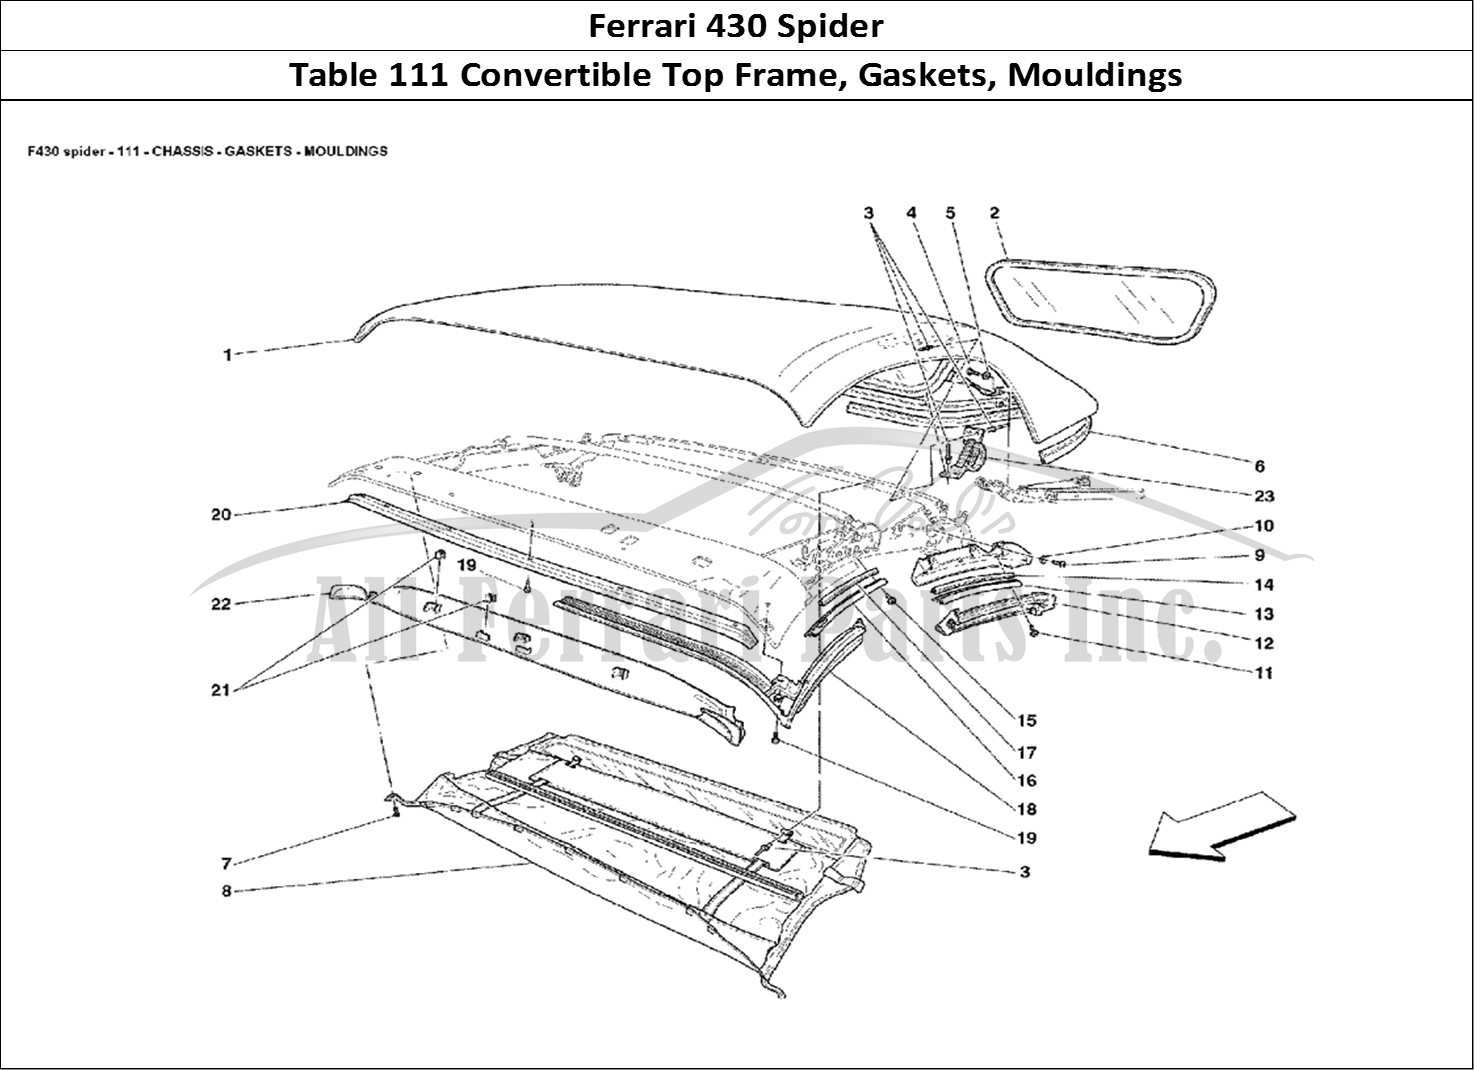 Ferrari Parts Ferrari 430 Spider Page 111 Chassis - Gaskets - Mould